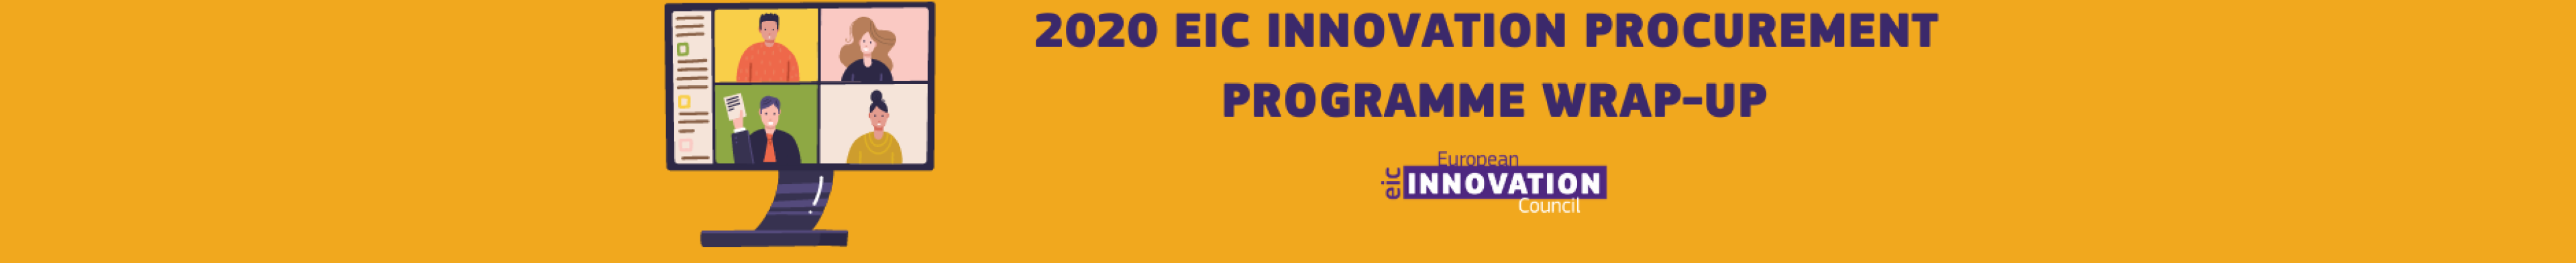 banner-eic_innovation_procurement_programme_wrapup.png